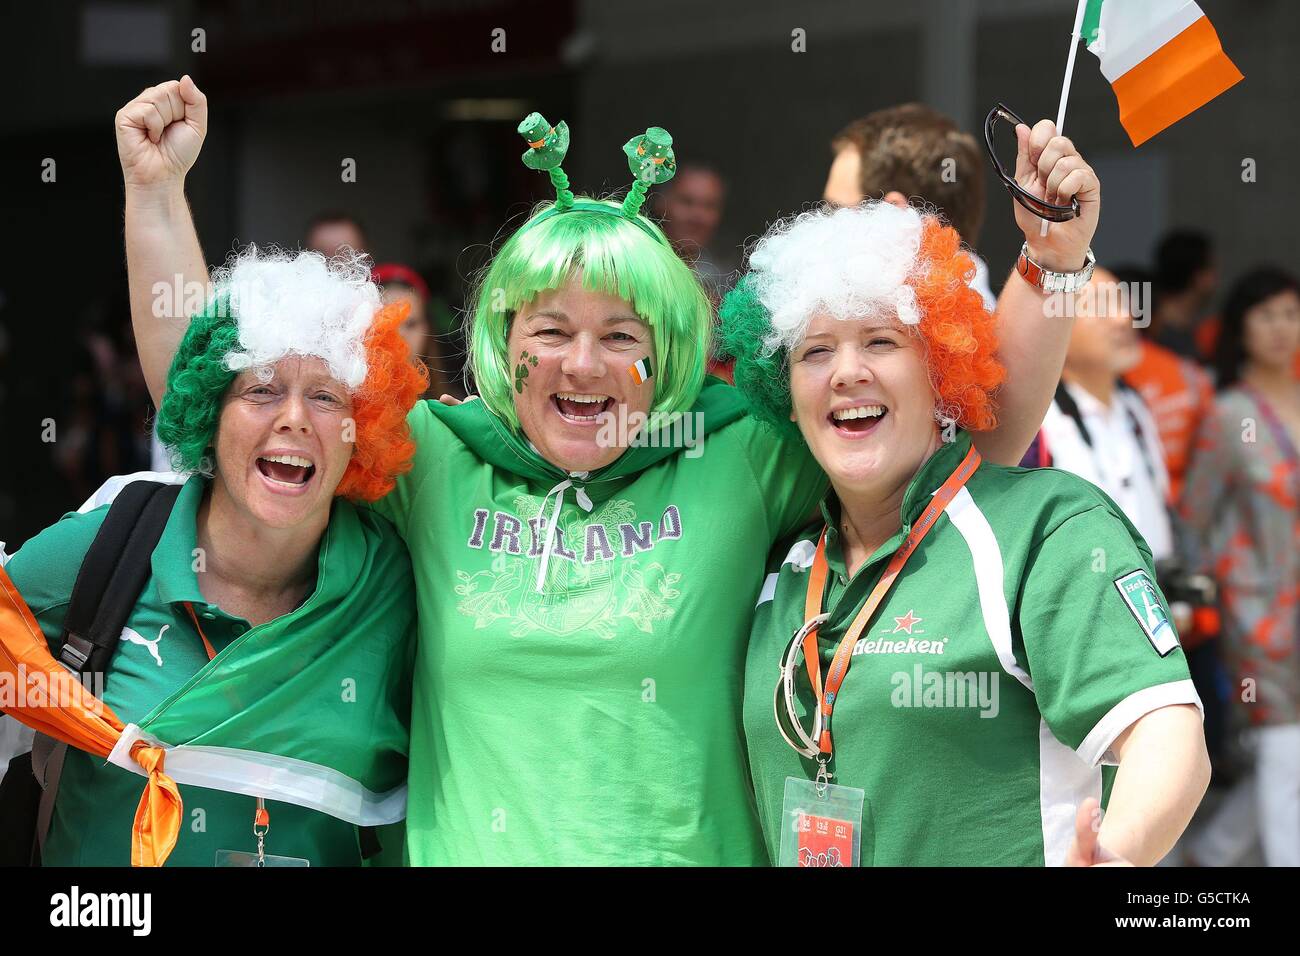 Irish Fans gathered for Ireland's Katie Taylor's bout against Tajikistan's Mavzuna Chorieva in the Women's Light (60 kg) Boxing at the ExCel Centre, London, on the twelfth day of the London 2012 Olympics. Stock Photo